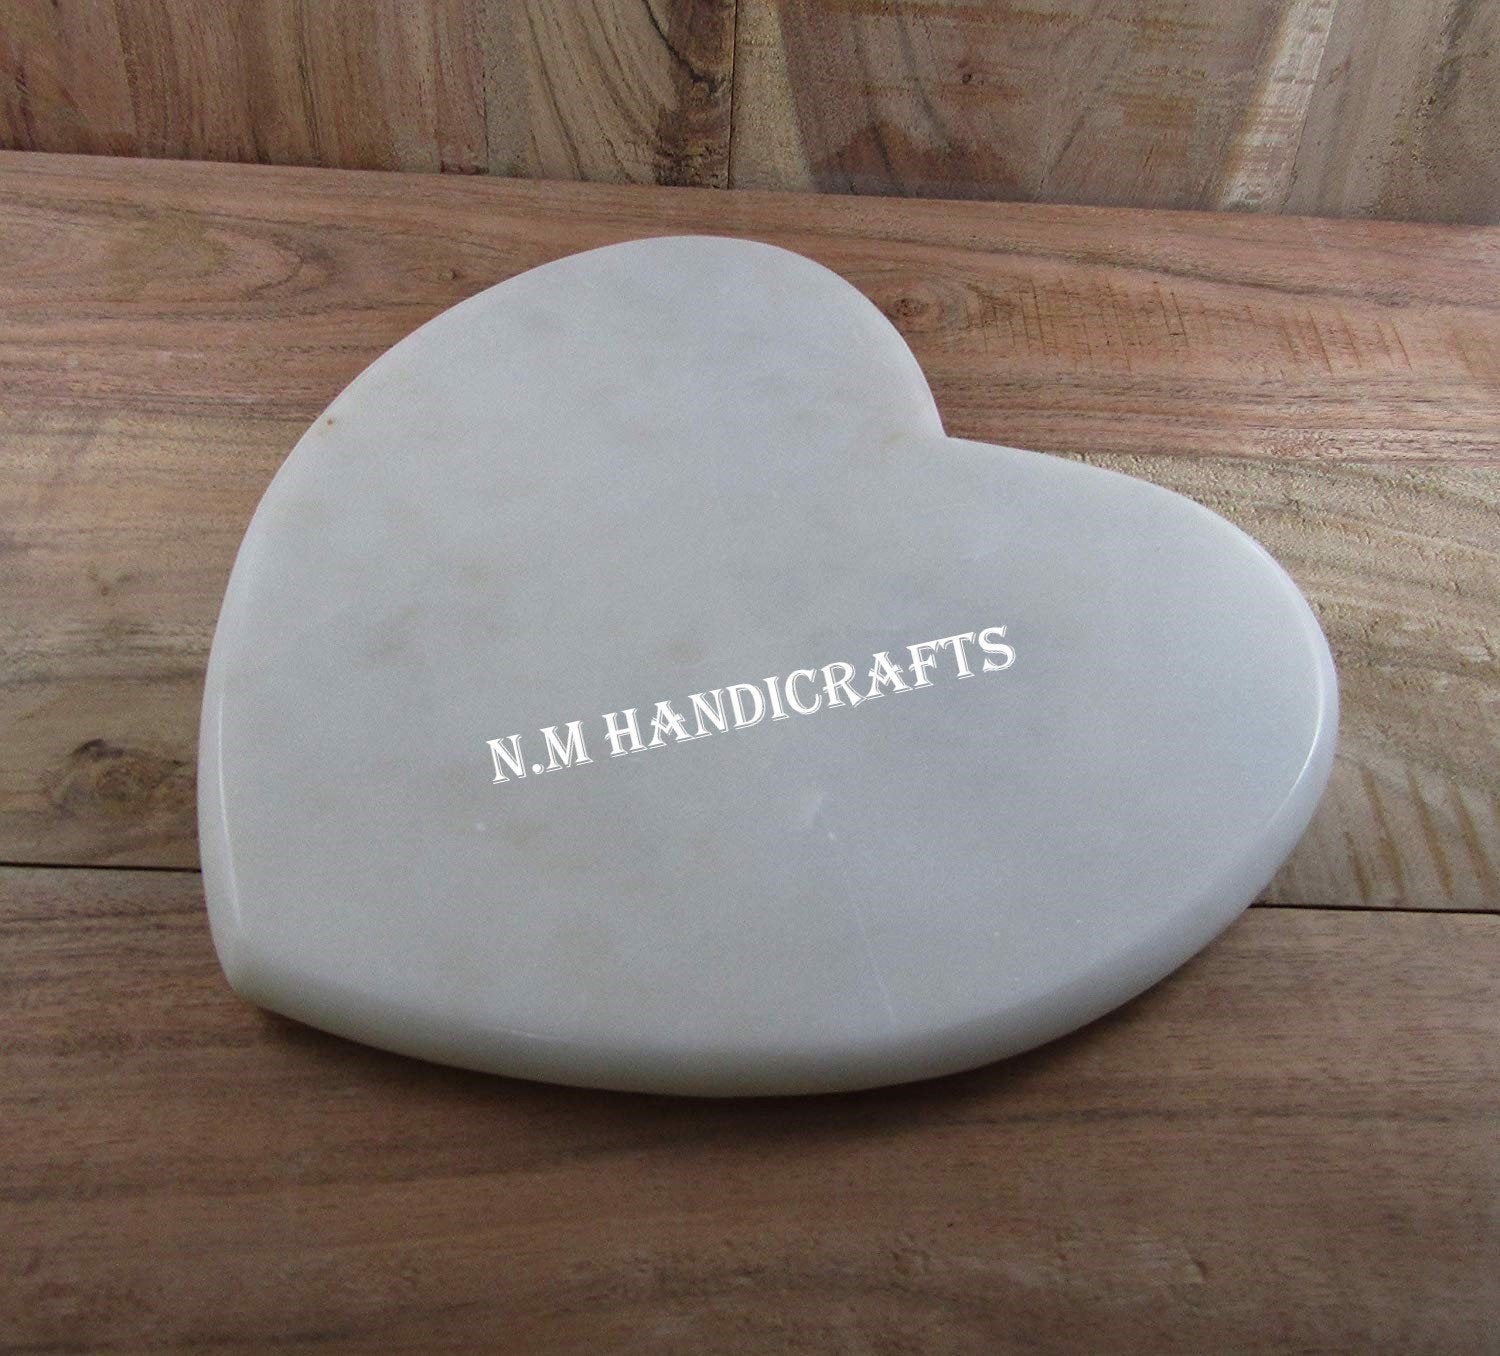 Exotic Heart Shaped White Marble Chopping Board, Coaster, Platter, Gift, Kitchen Decor, Home Decor, Handcrafted Art, Multi Use Piece